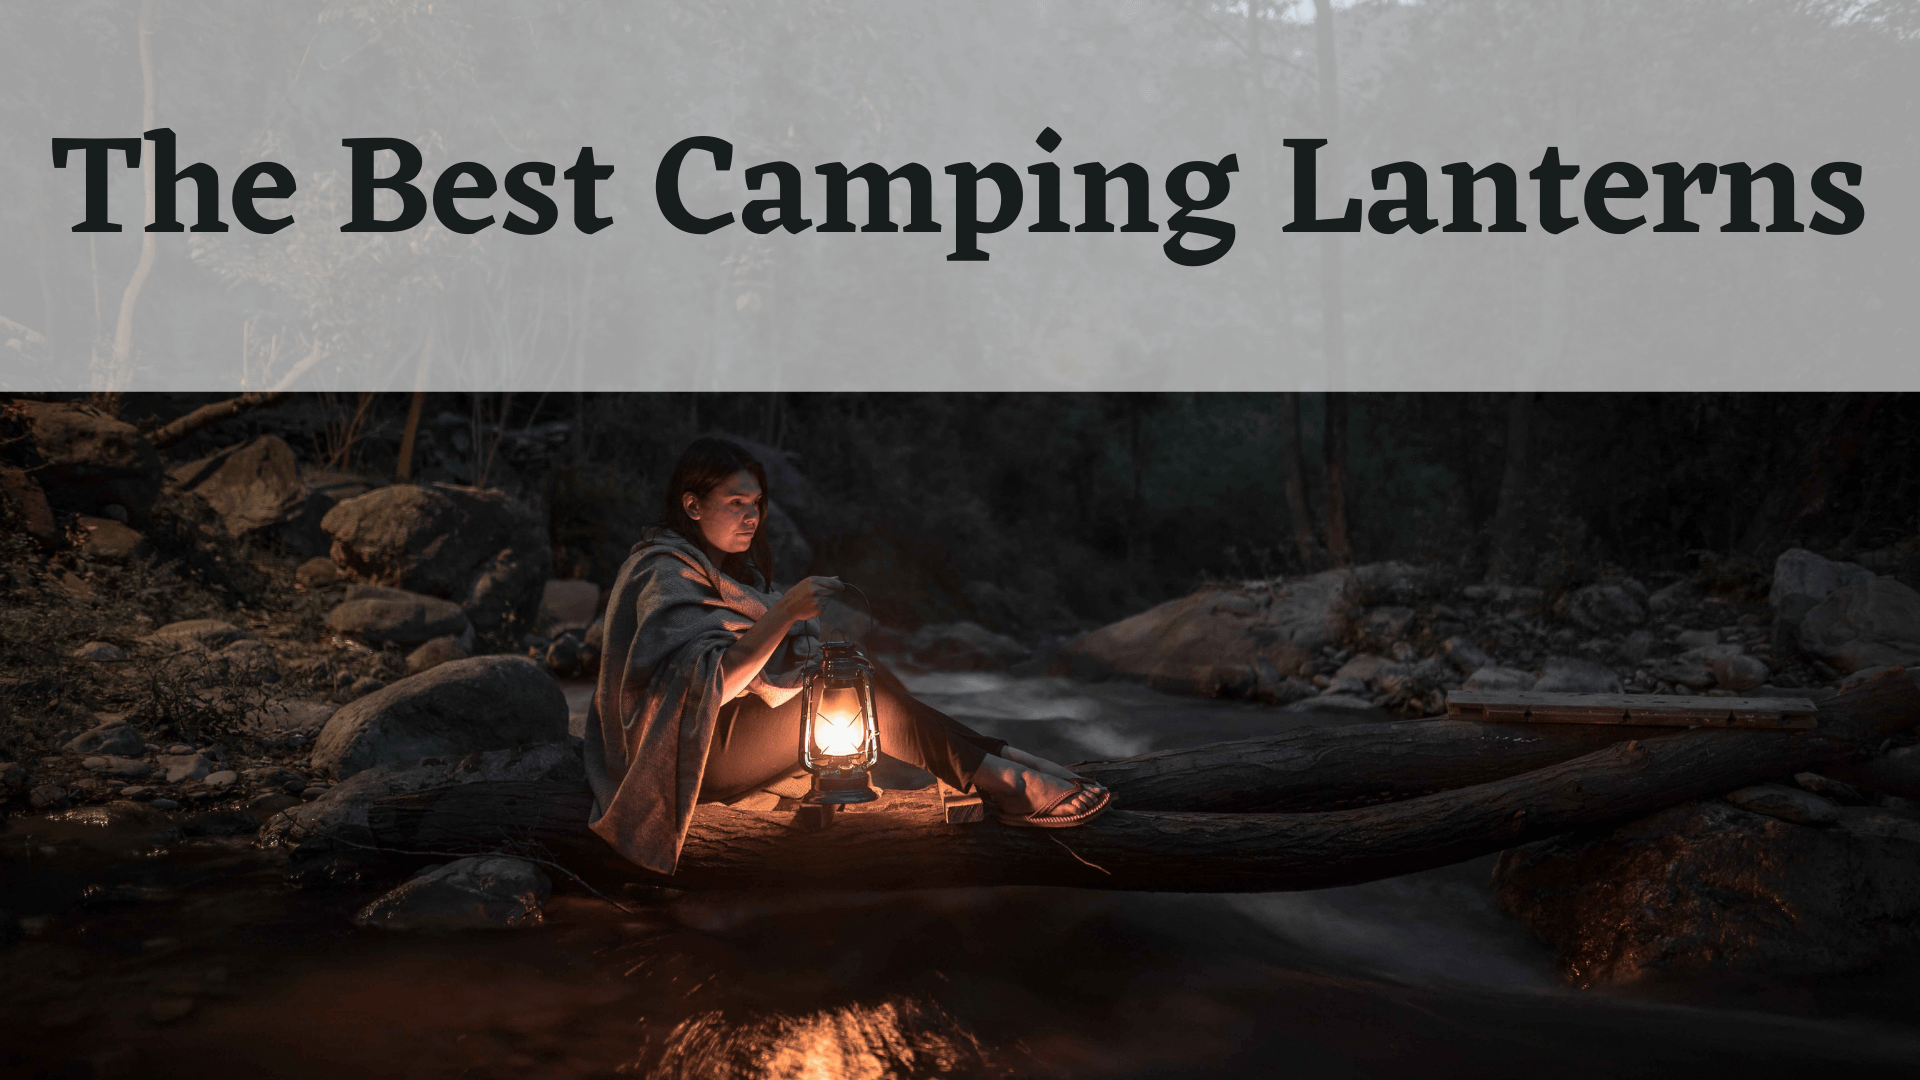 The Best Camping Lanterns